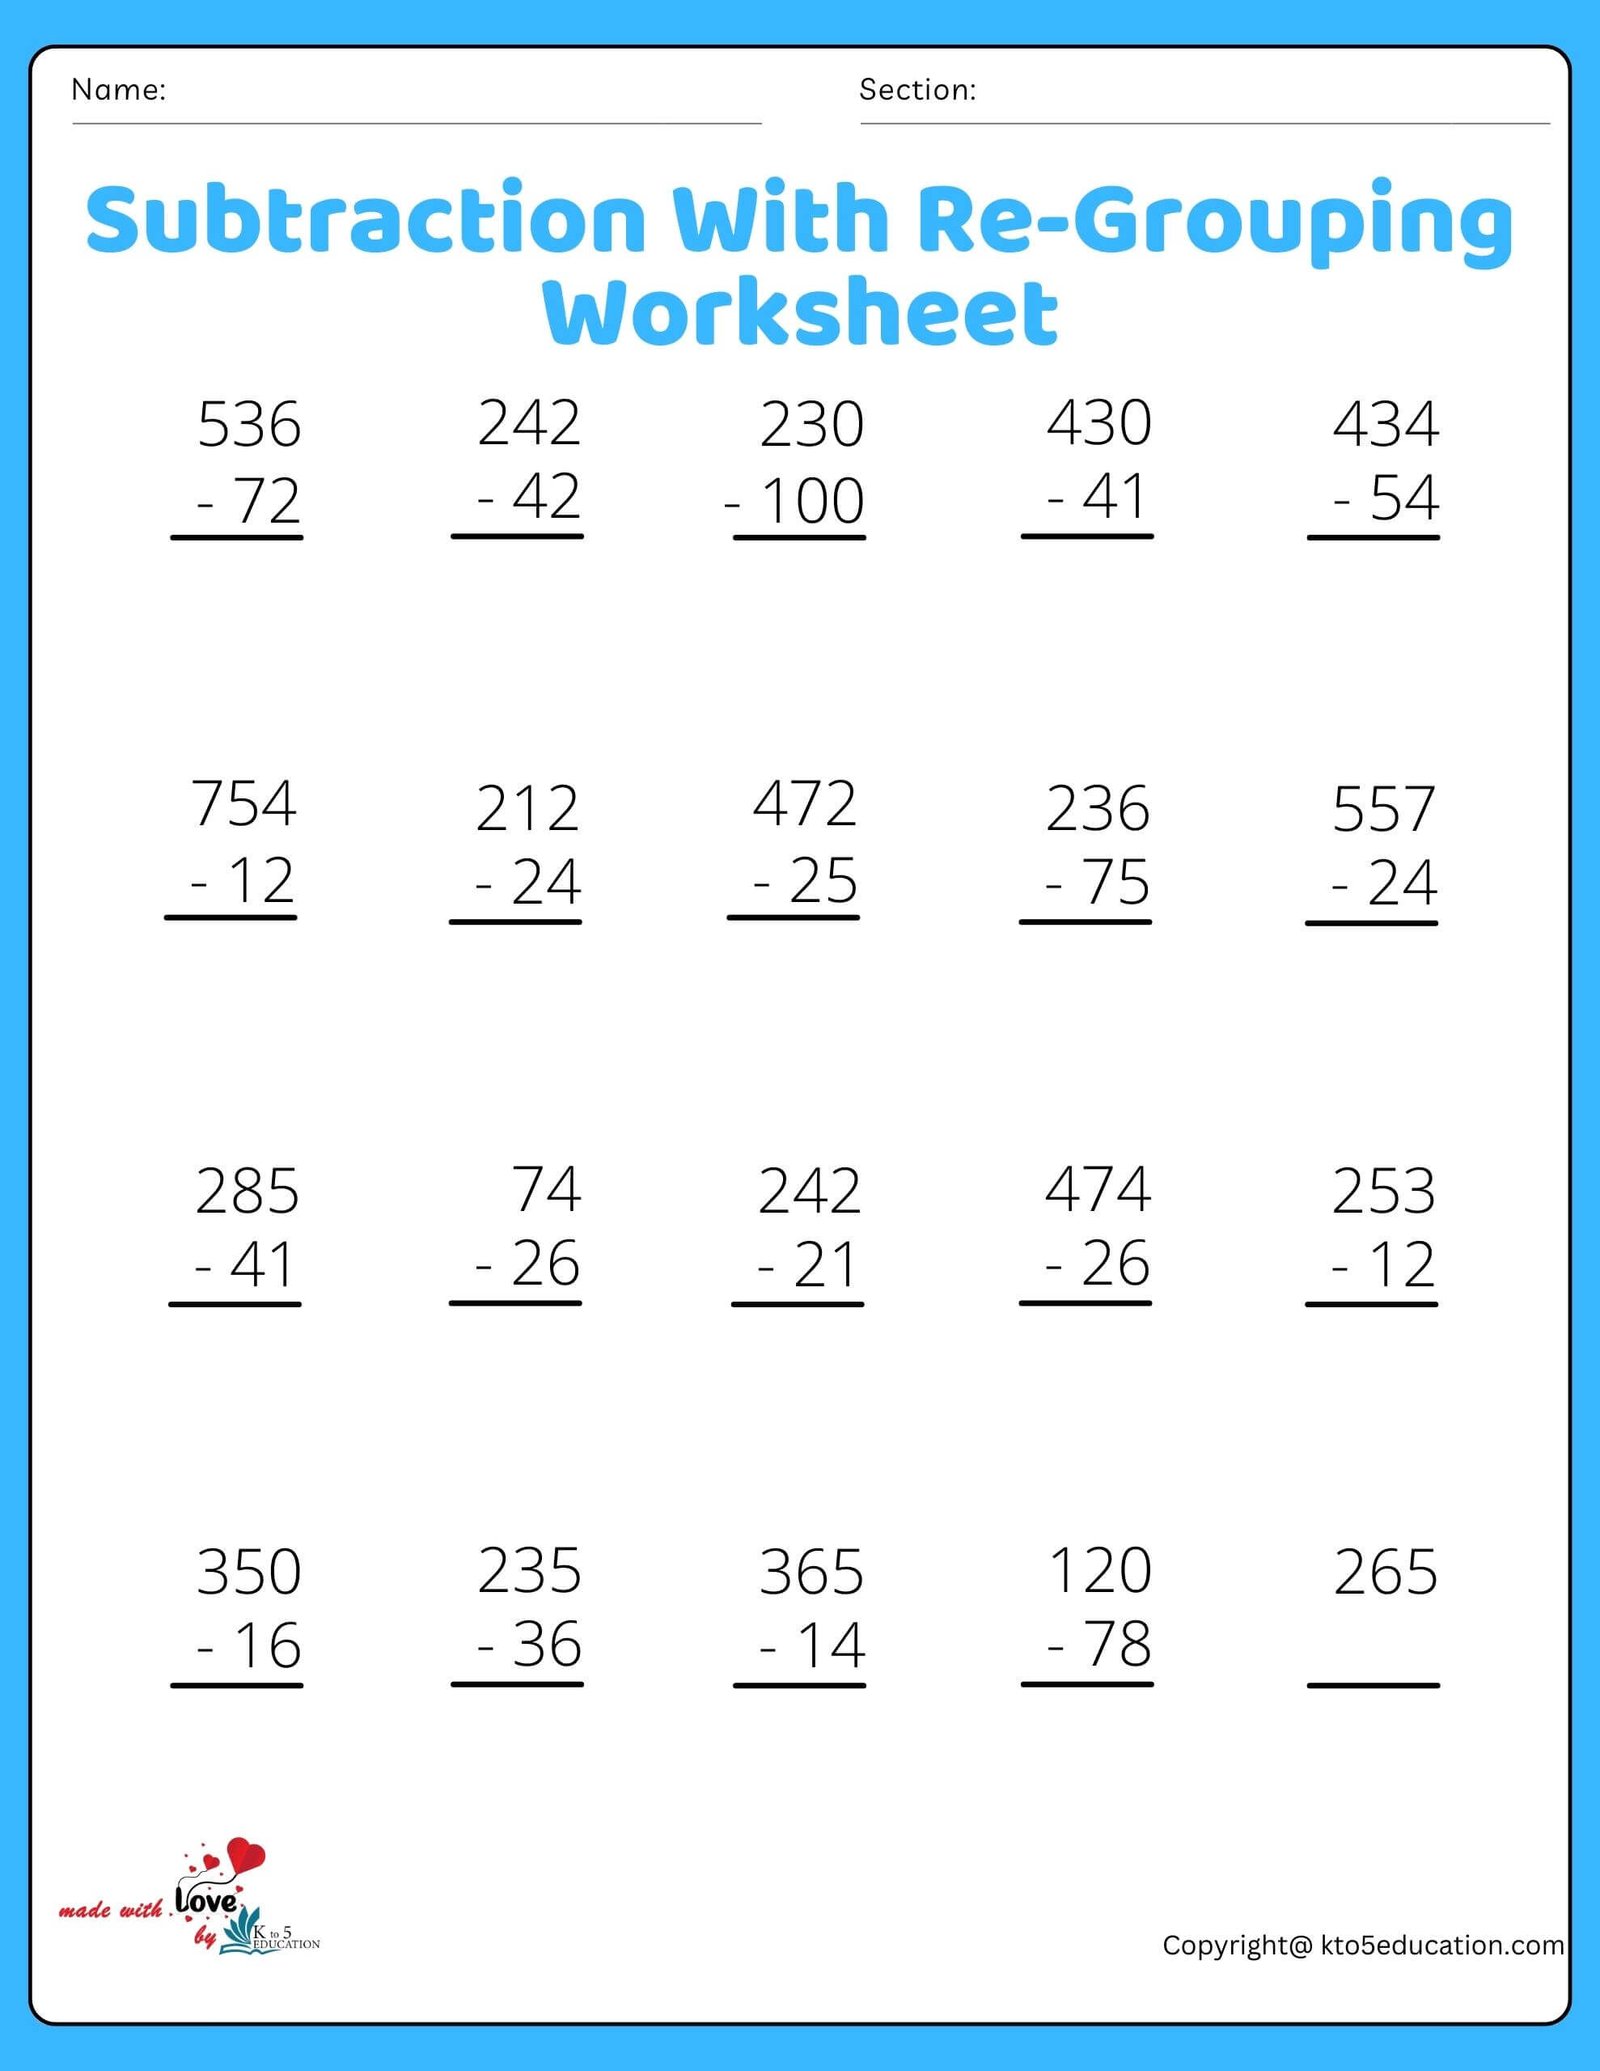 Subtractions With Re-Grouping Worksheets